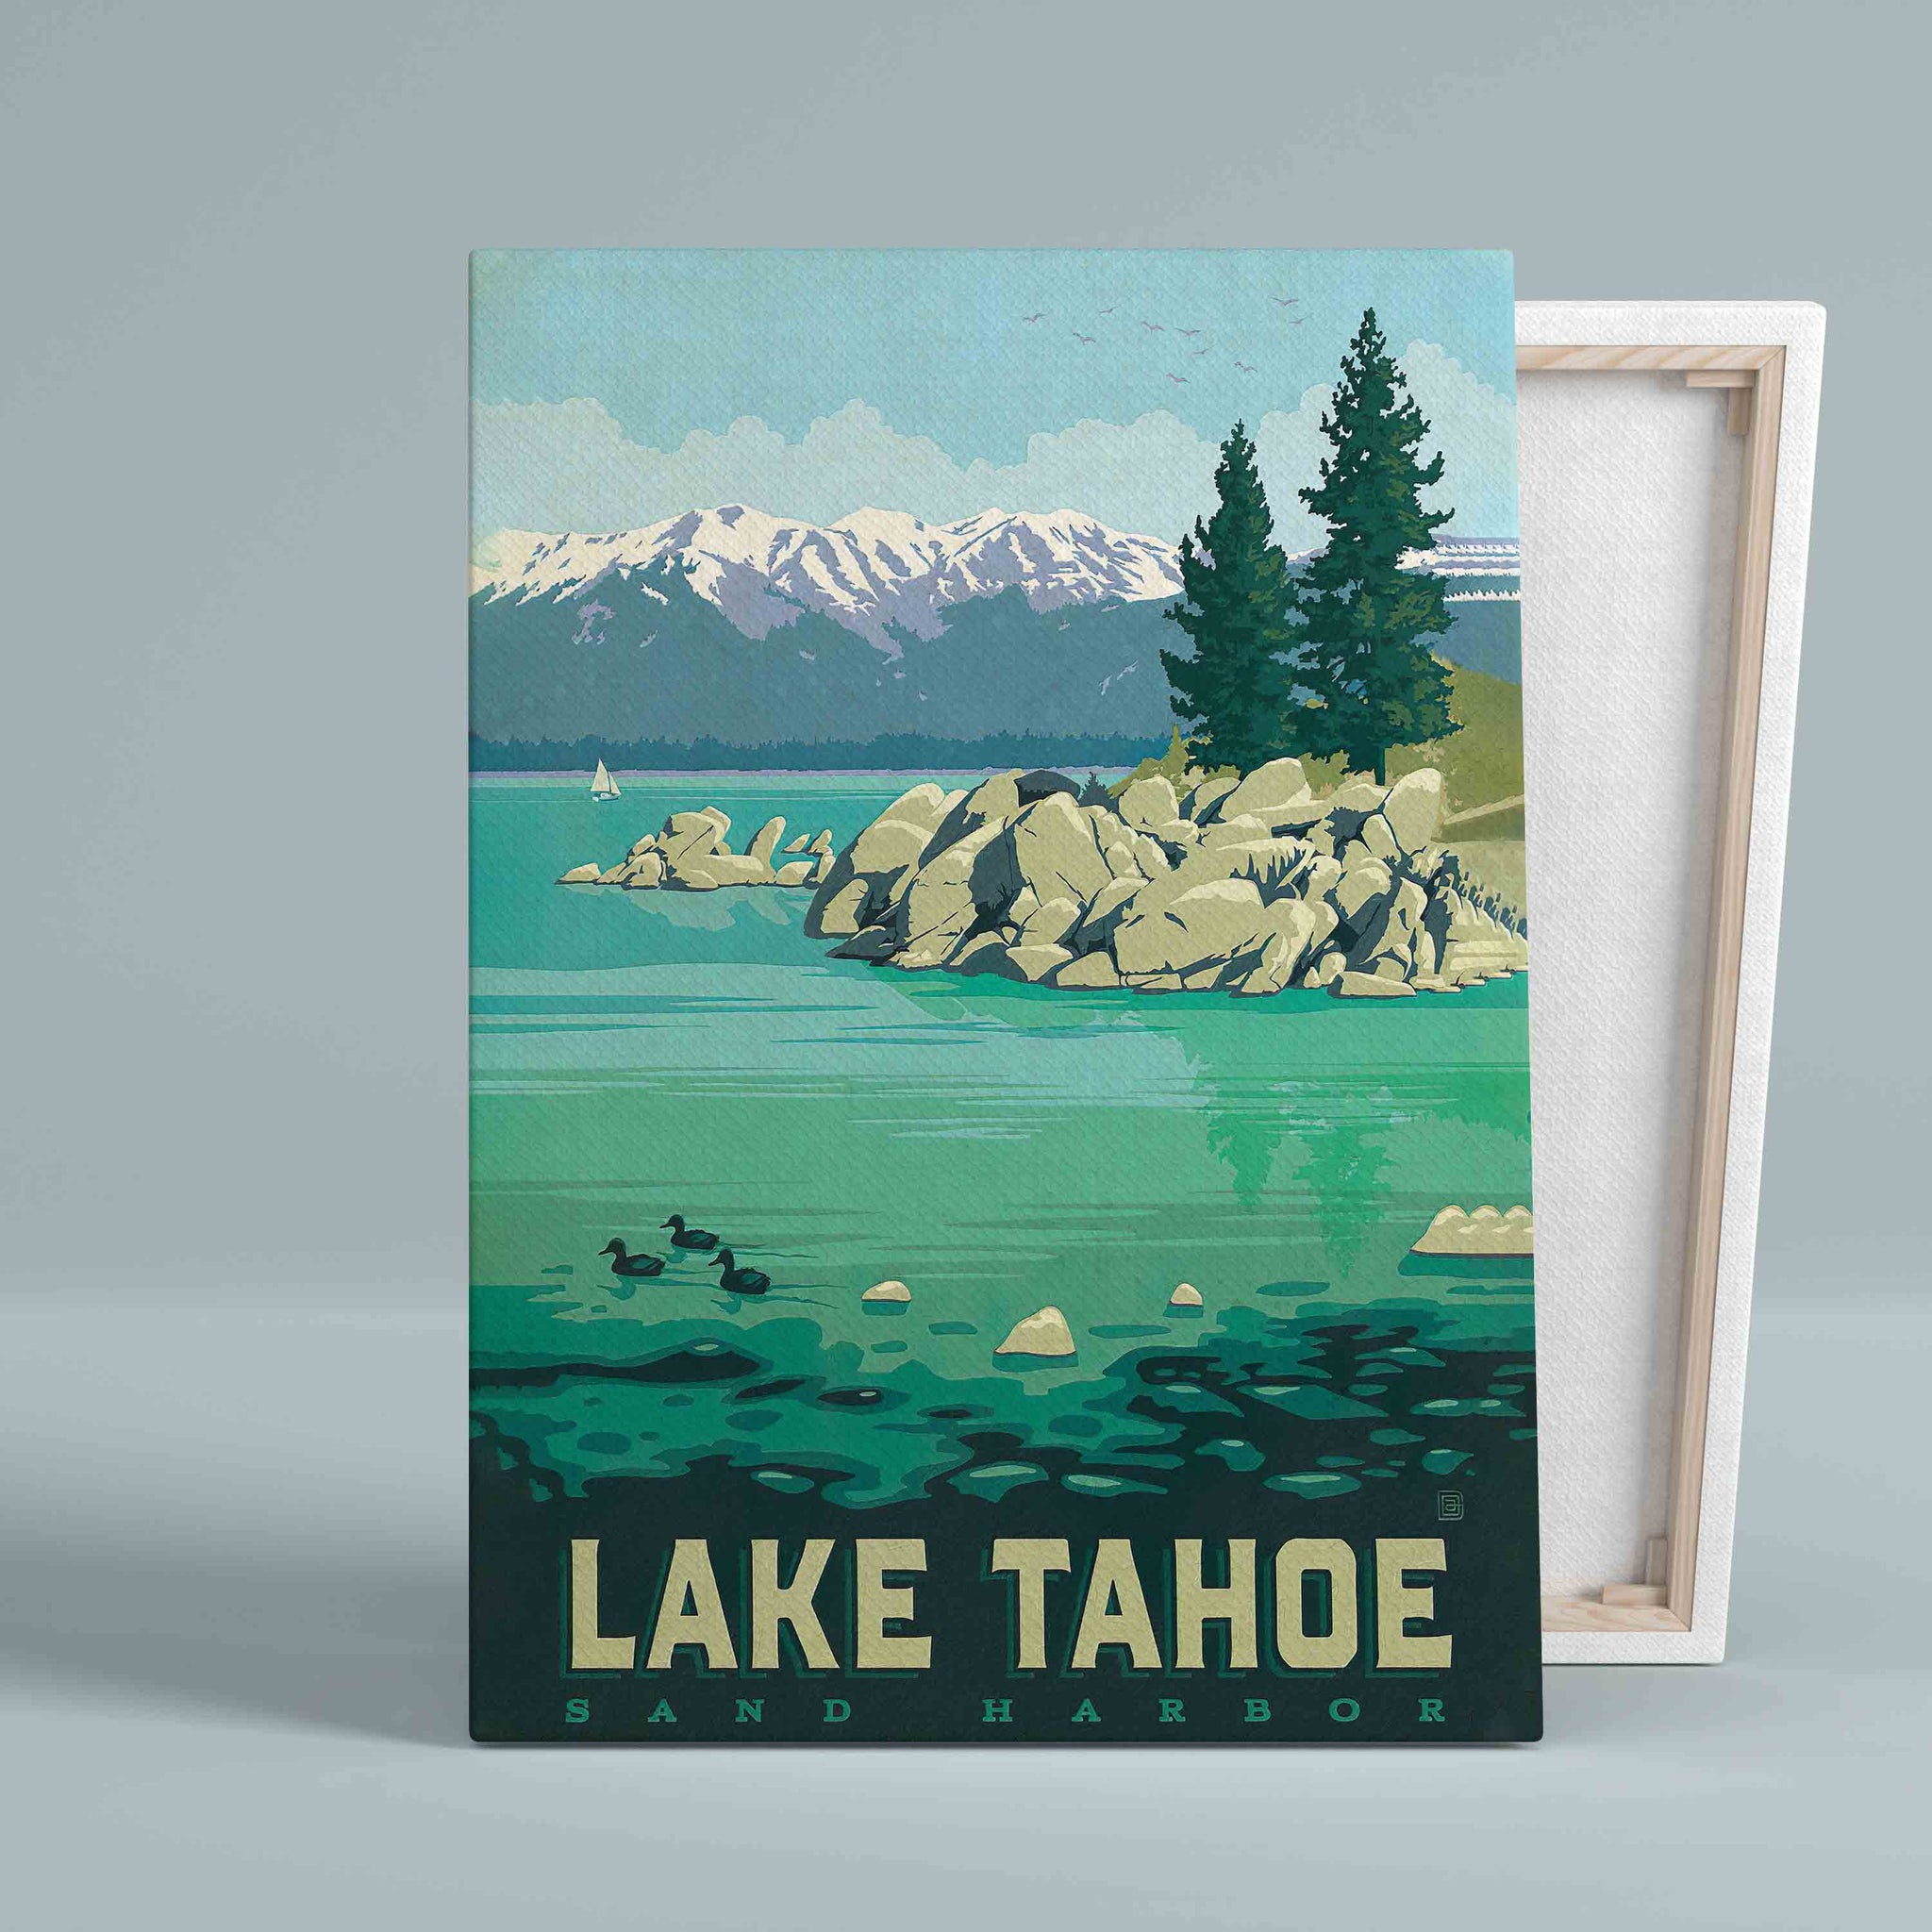 Lake Tahoe Canvas, Sand Harbor Canvas, Painting Canvas, Wall Art Canvas